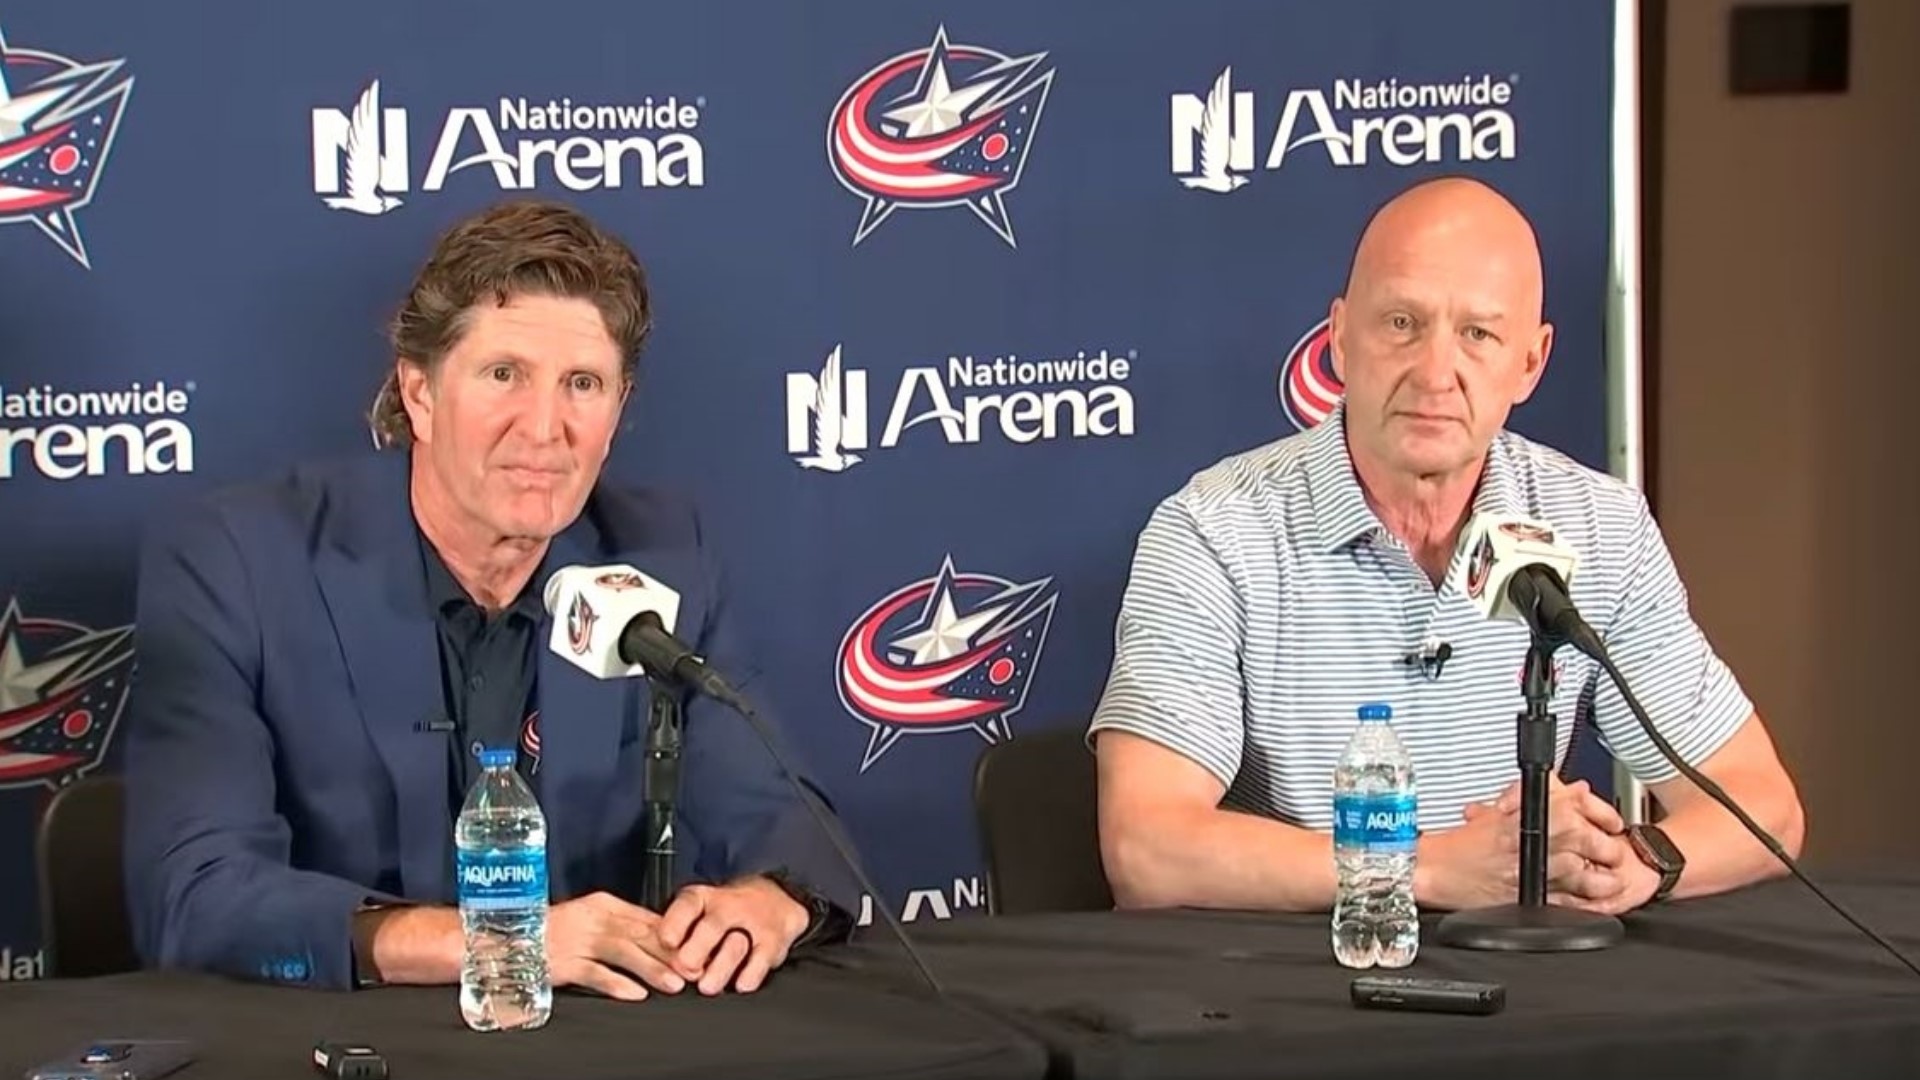 Mike Babcock is back in the NHL with the Columbus Blue Jackets, confident he has evolved as a coach in his nearly four years out of a pro job.